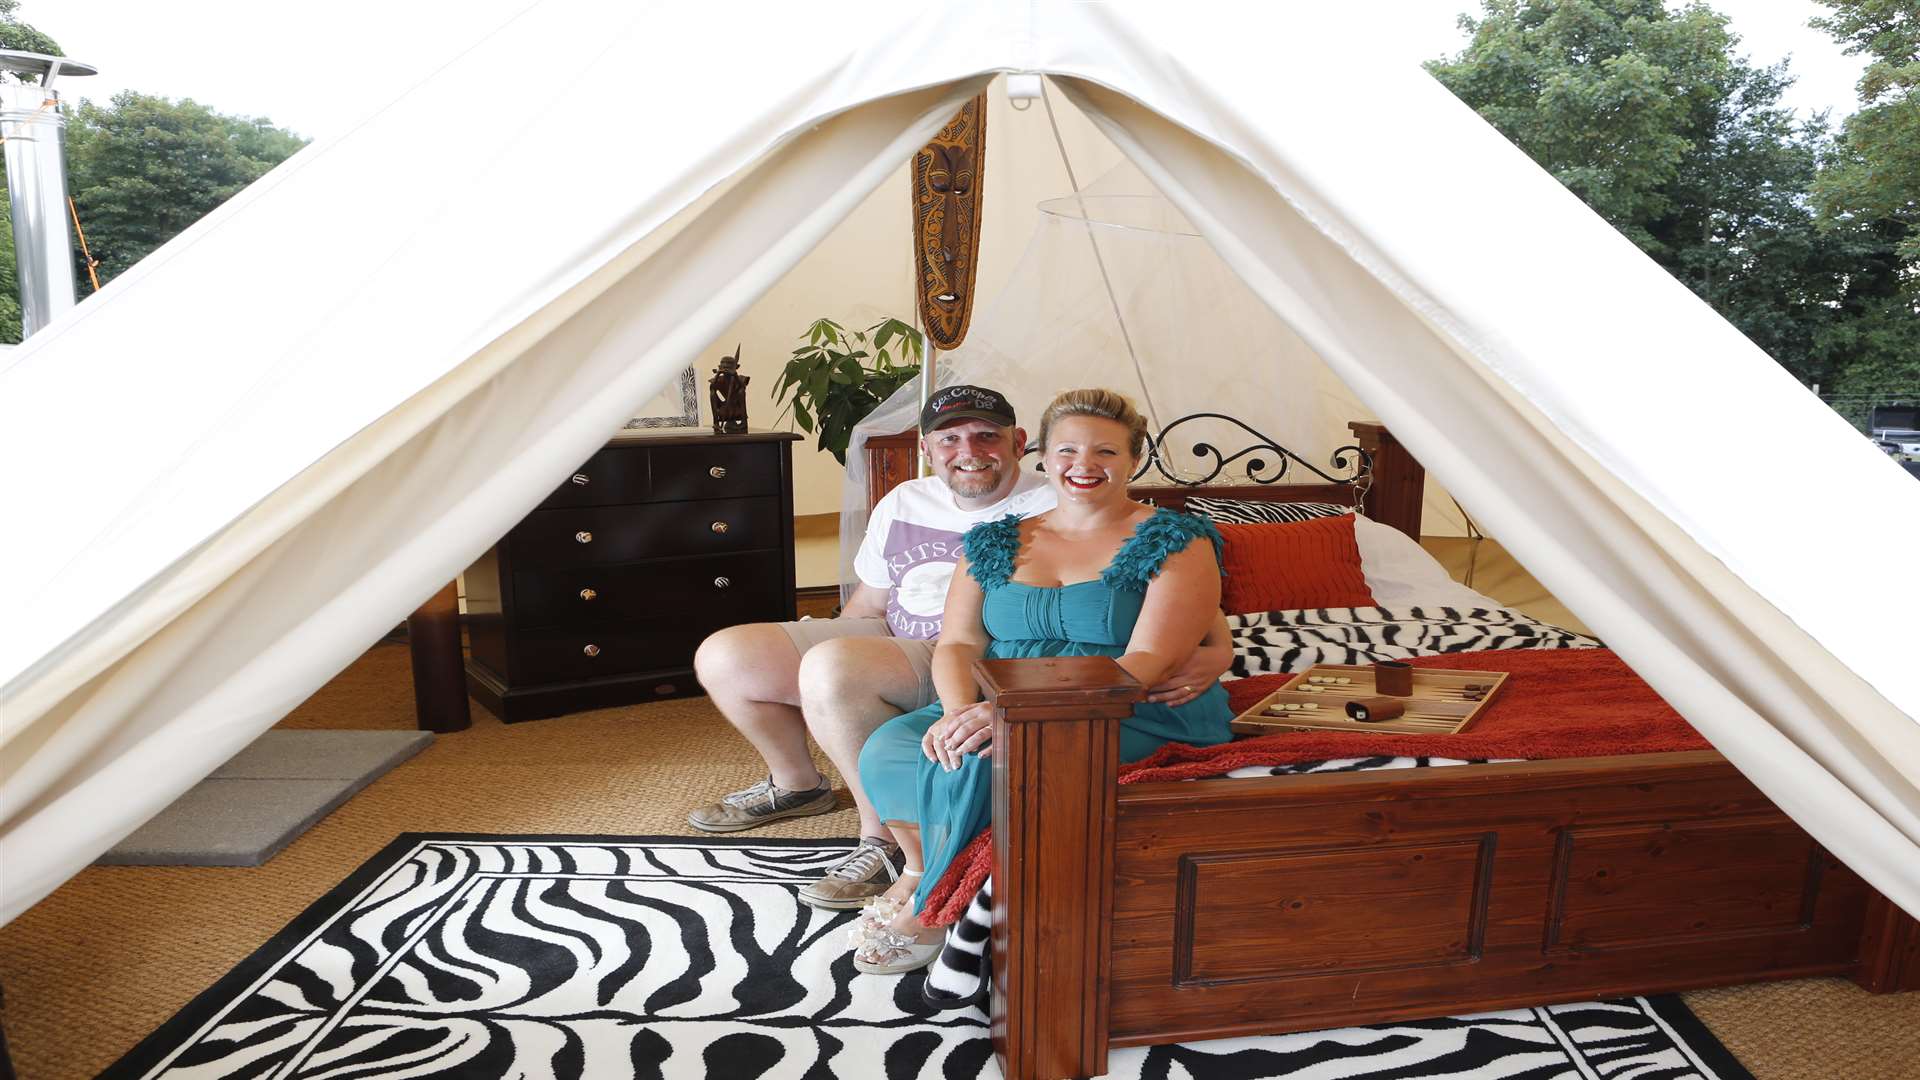 Owners Ami and Mark Culver in the Mamadou African themed tent